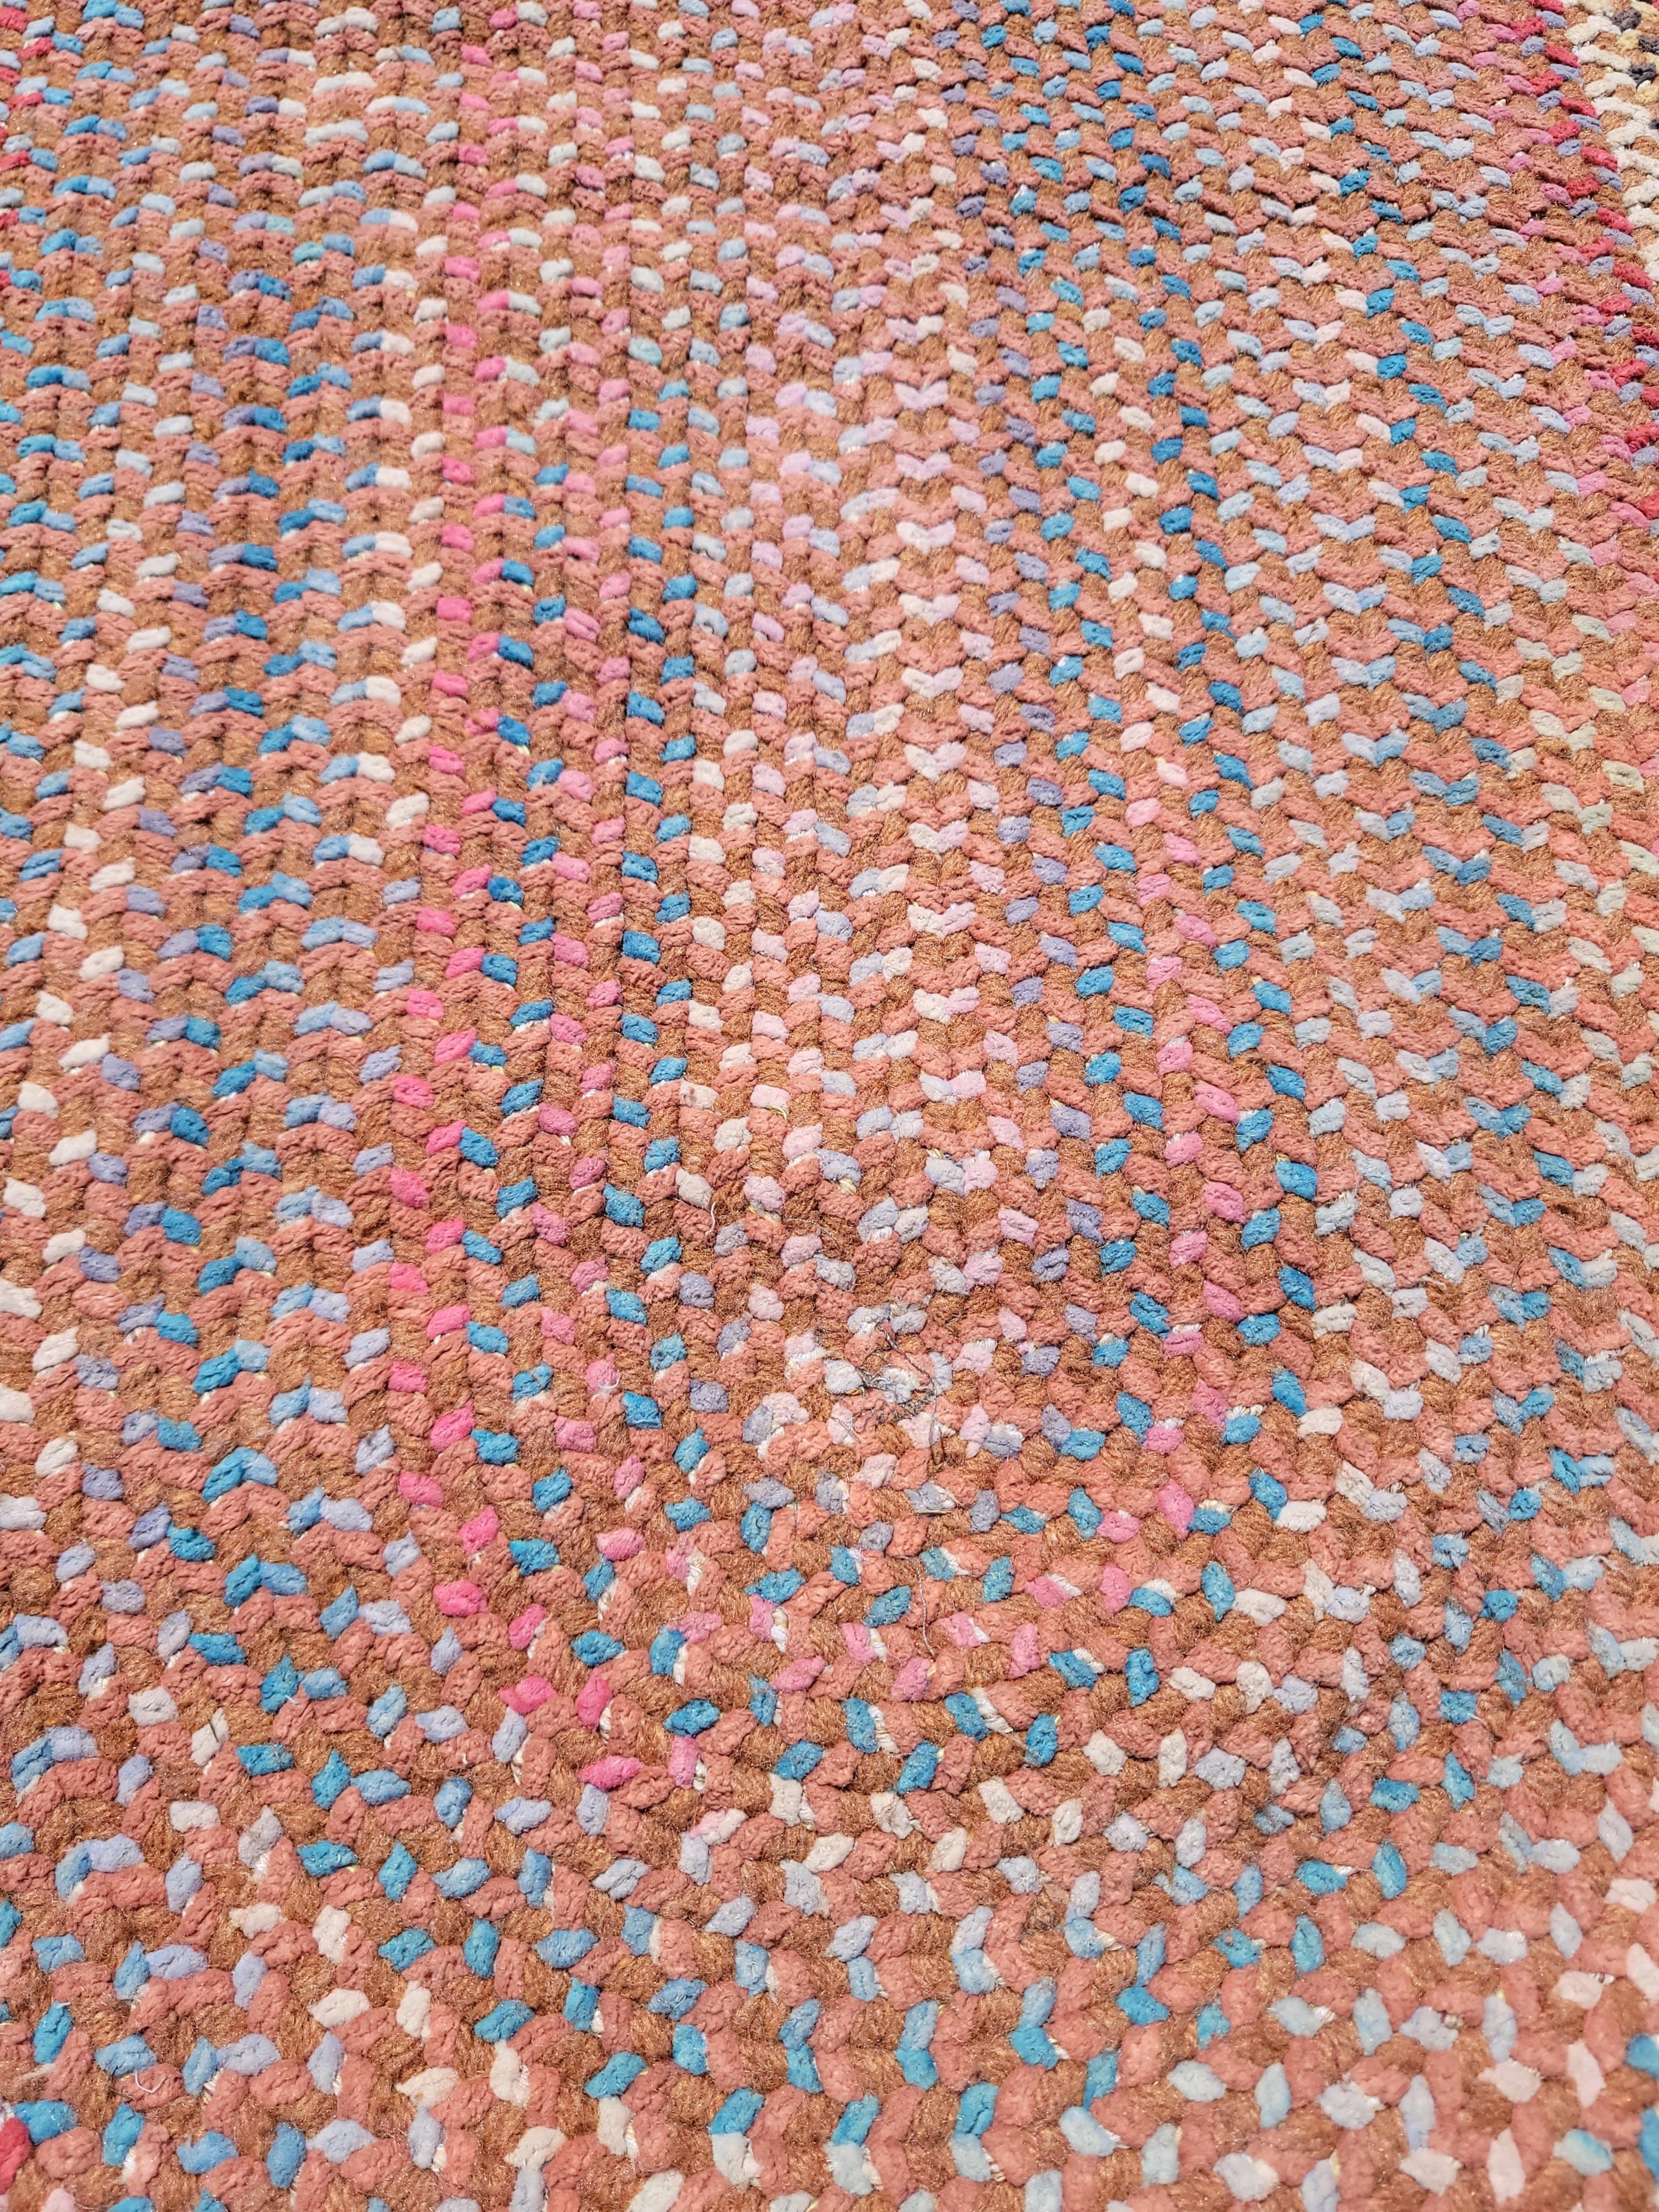 Amazing wool chenille oval braided rug in fantastic fall colors with a great sky blue trail border. The condition is pristine and vivid colors.